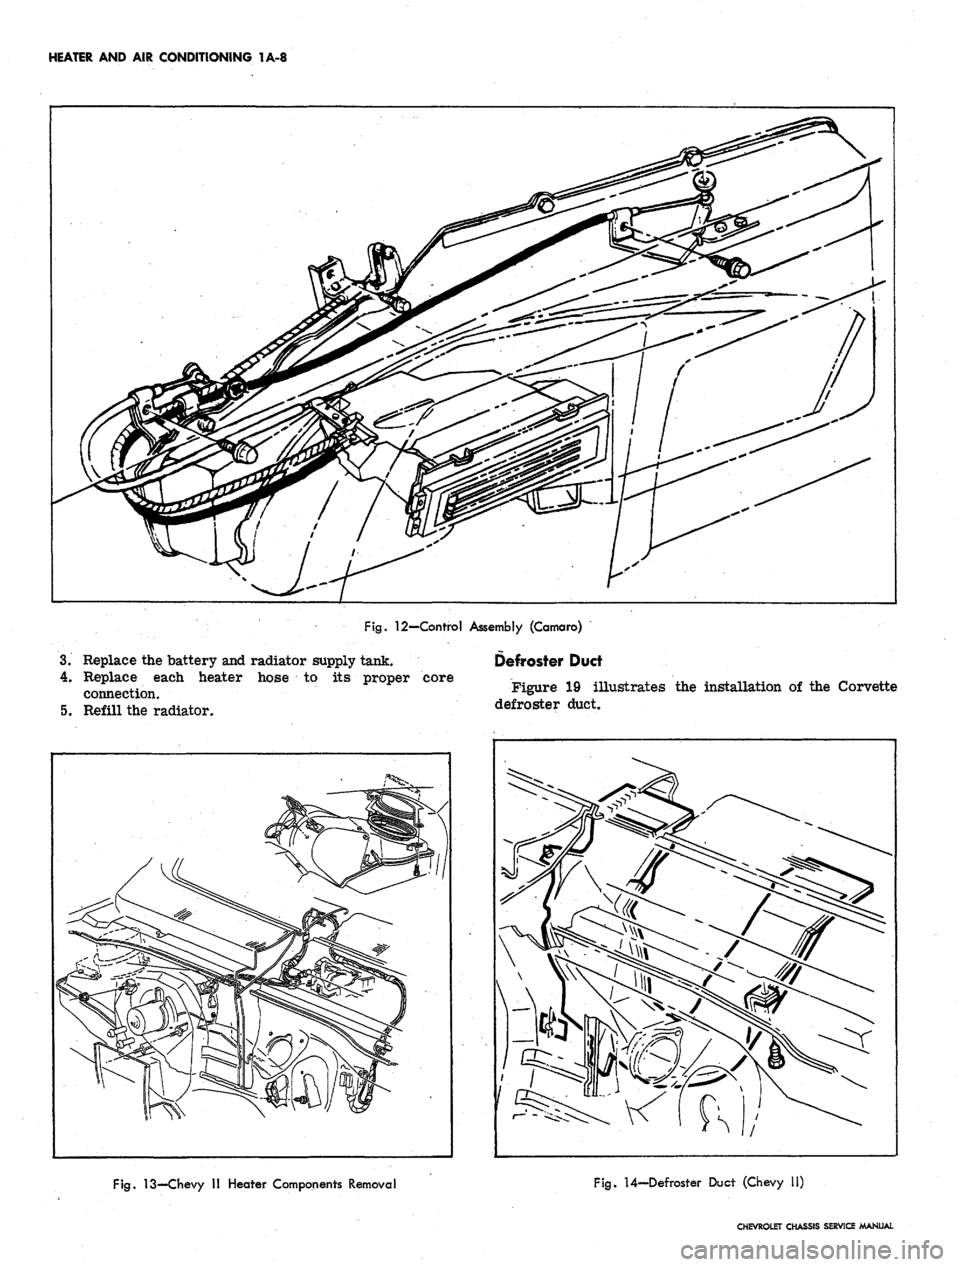 CHEVROLET CAMARO 1967 1.G Chassis Workshop Manual 
HEATER AND AIR CONDITIONING 1A-8

Fig.
 12—Control Assembly (Camaro)

3.
 Replace the battery and radiator supply tank.

4.
 Replace each heater hose to its proper core

connection.

5. Refill the 